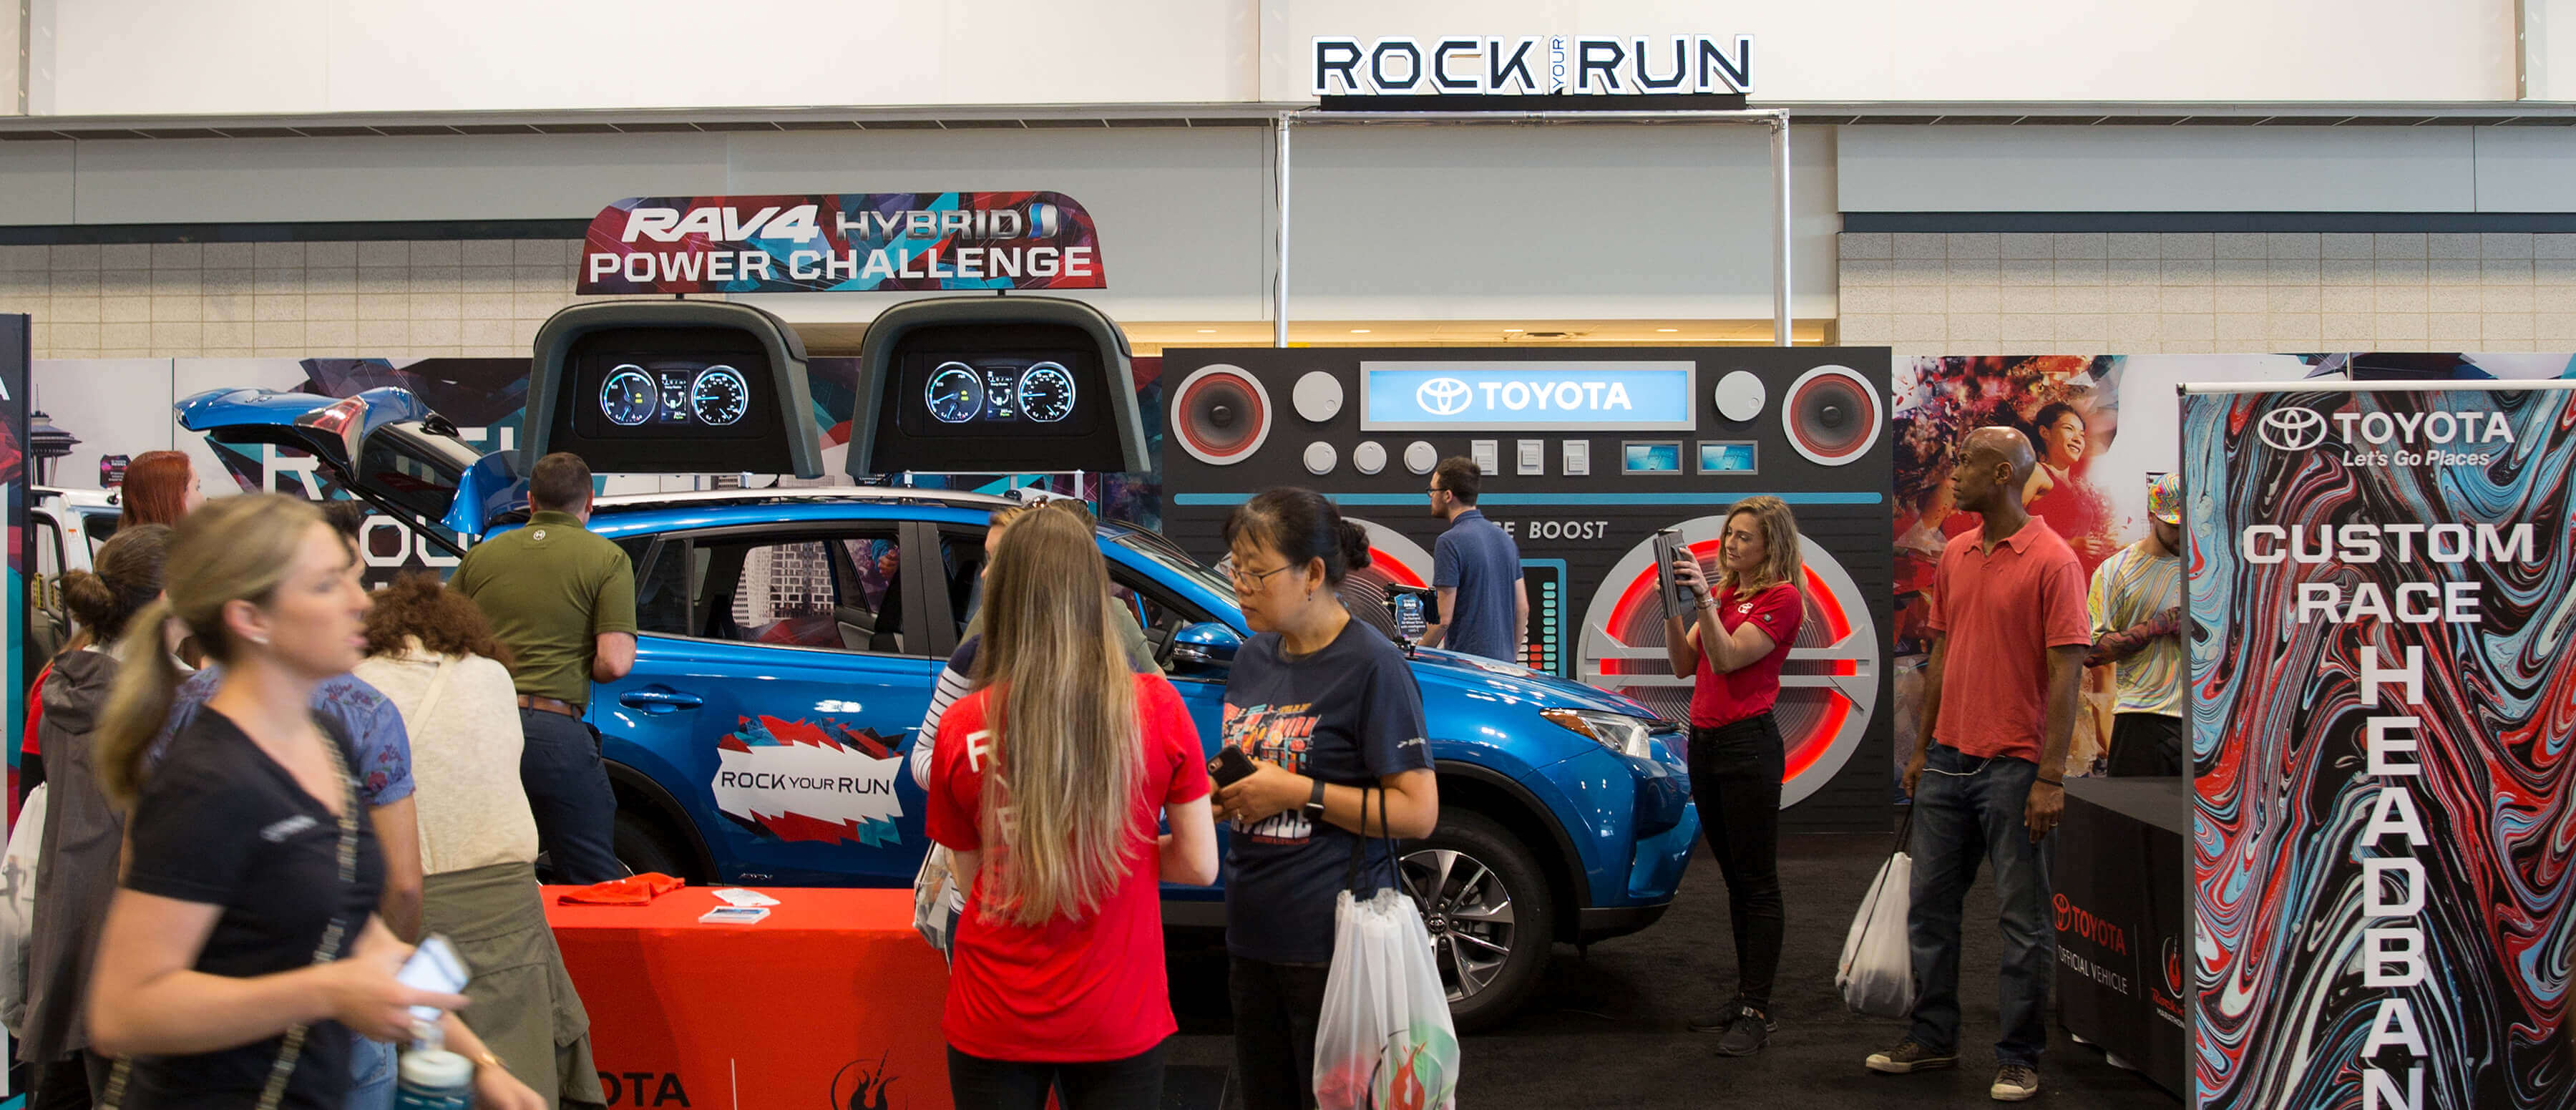 Photo capturing action on the expo floor of the Toyota Rock Your Run event.